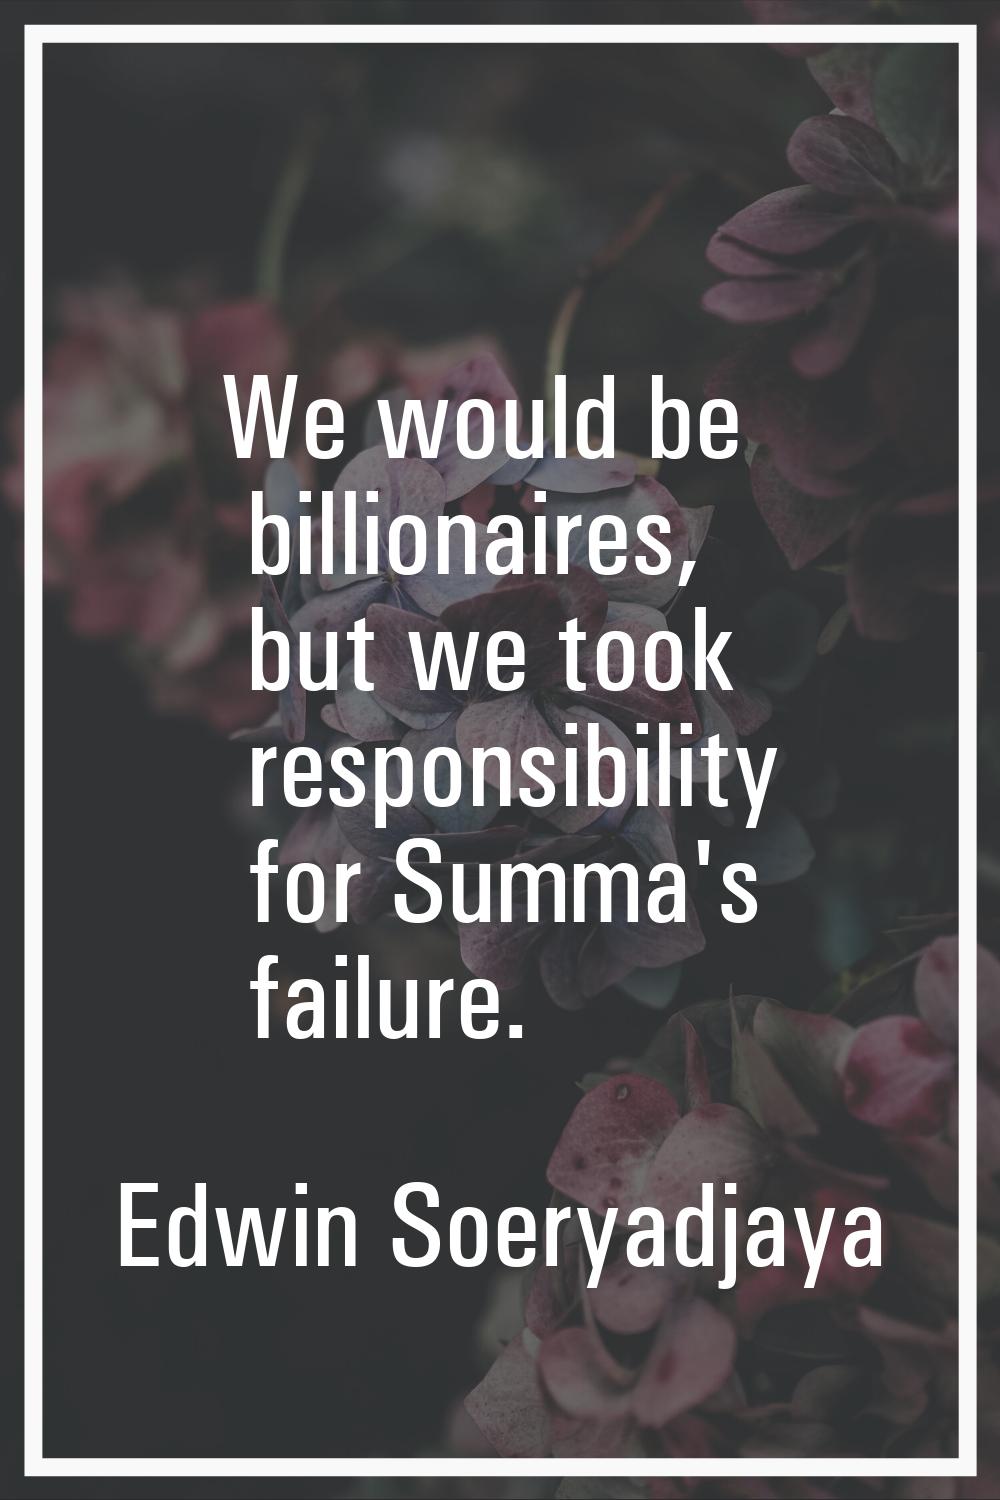 We would be billionaires, but we took responsibility for Summa's failure.